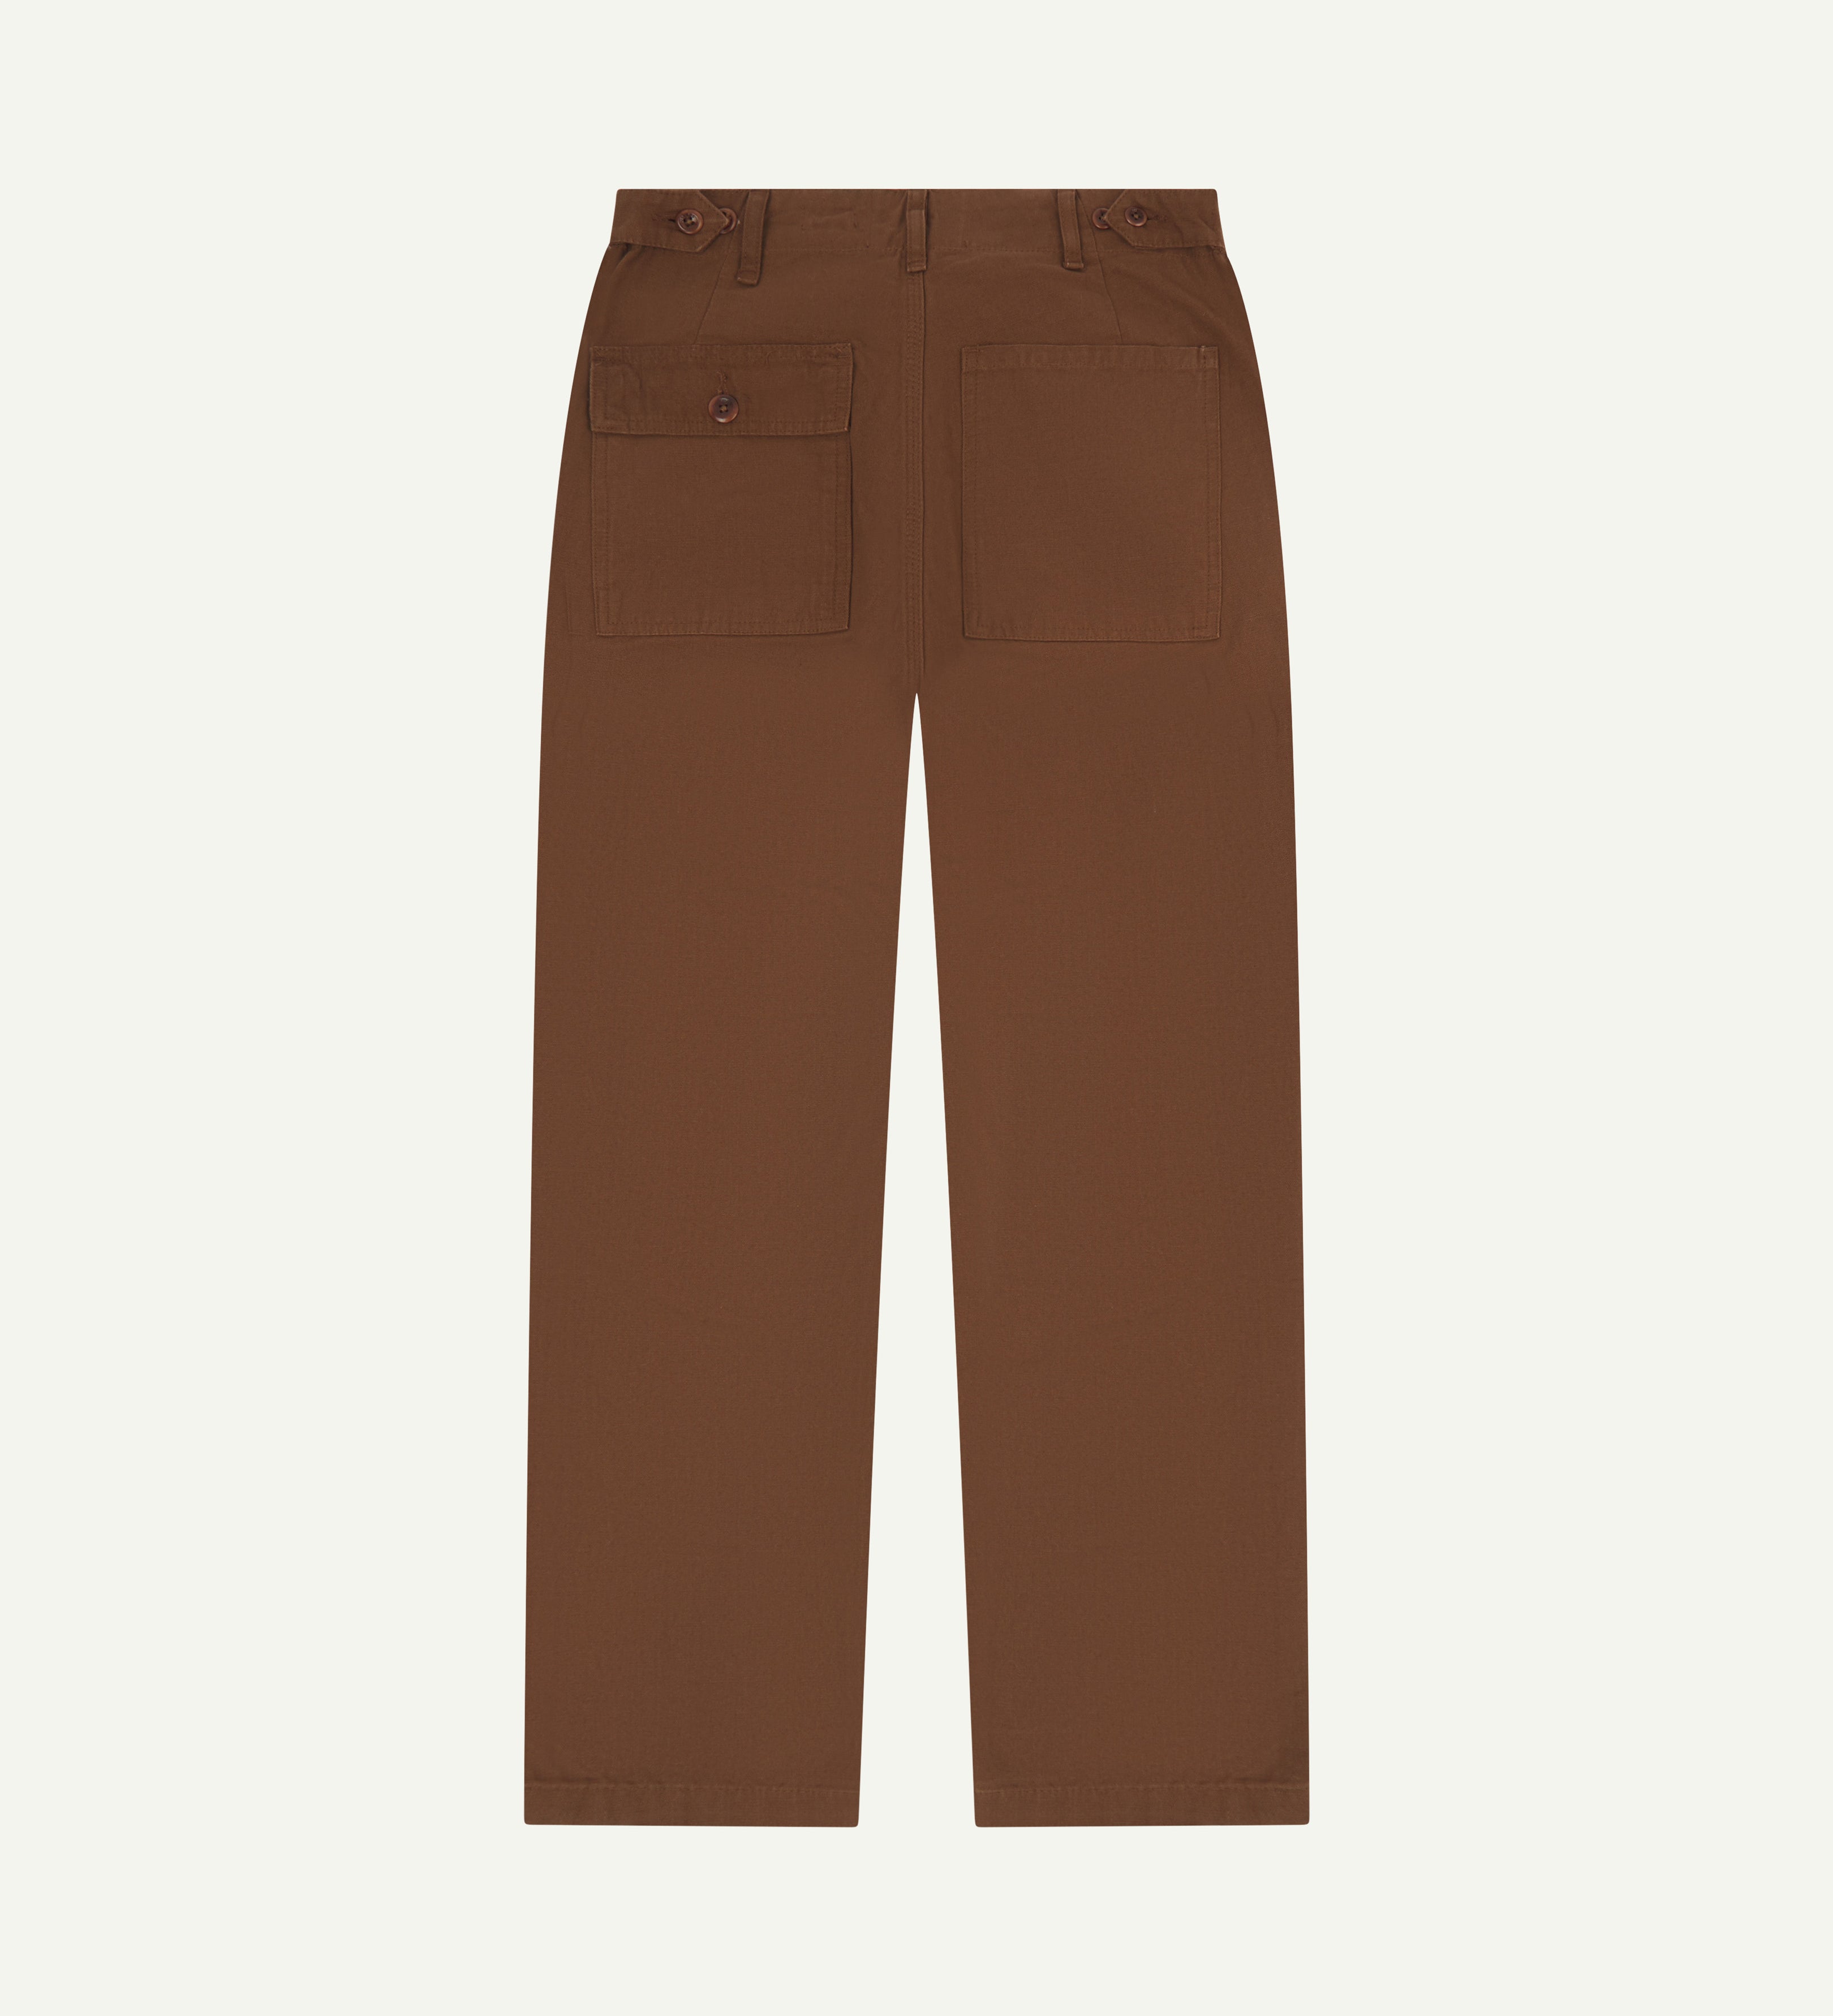 Flat view of back of #5005 Uskees men's organic cotton 'chocolate' coloured trousers on white background.